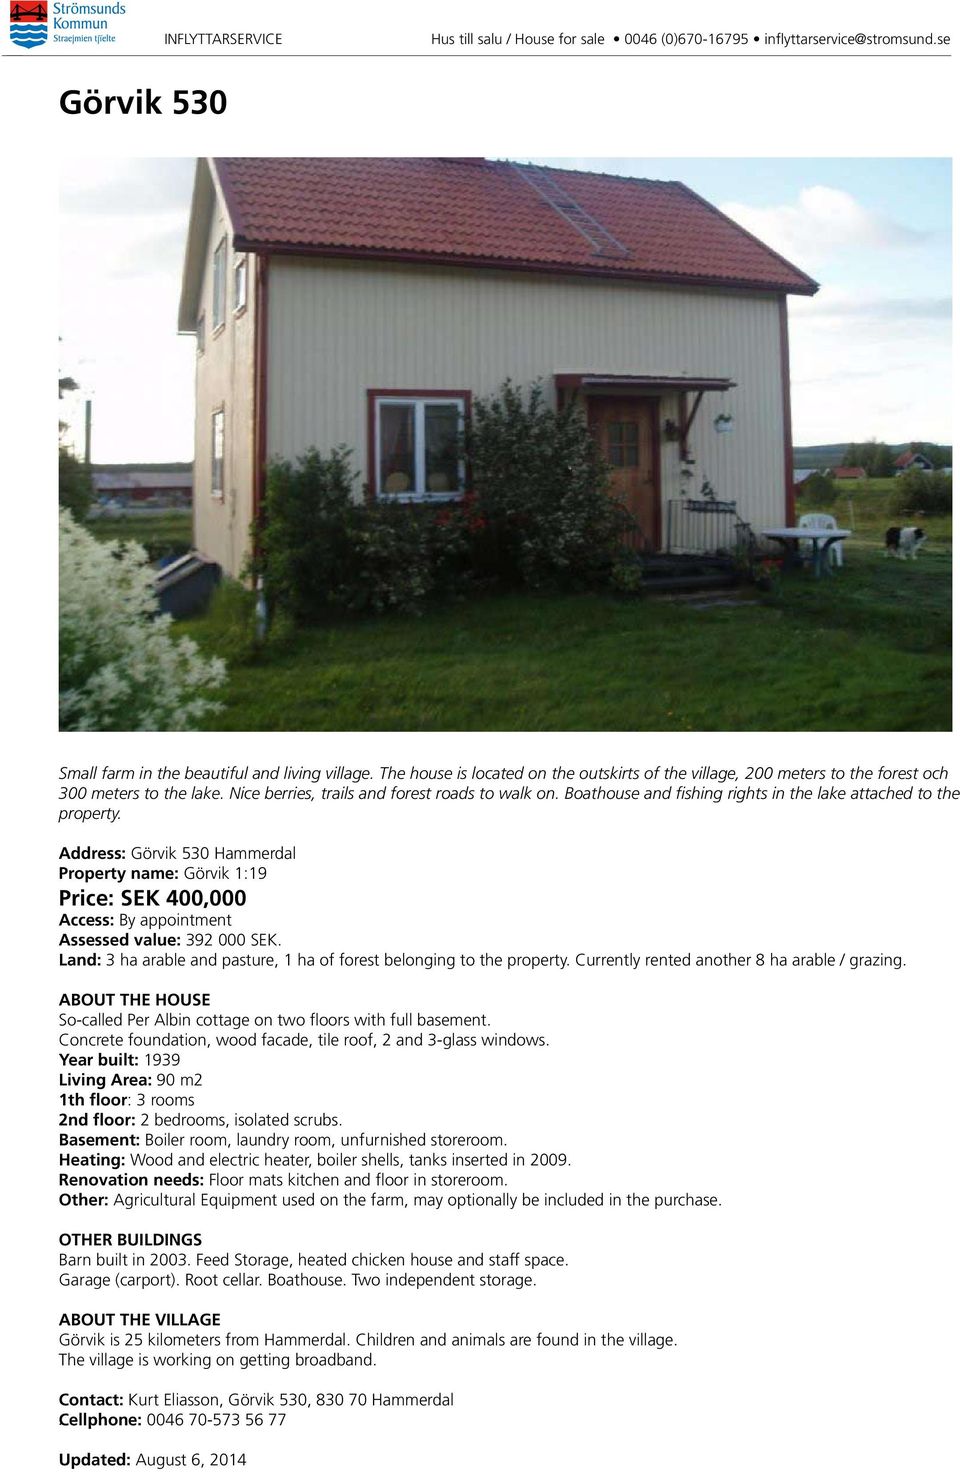 Address: 50 Hammerdal Property name: 1:19 Price: SEK 400,000 Access: By appointment Assessed value: 92 000 SEK. Land: ha arable and pasture, 1 ha of forest belonging to the property.